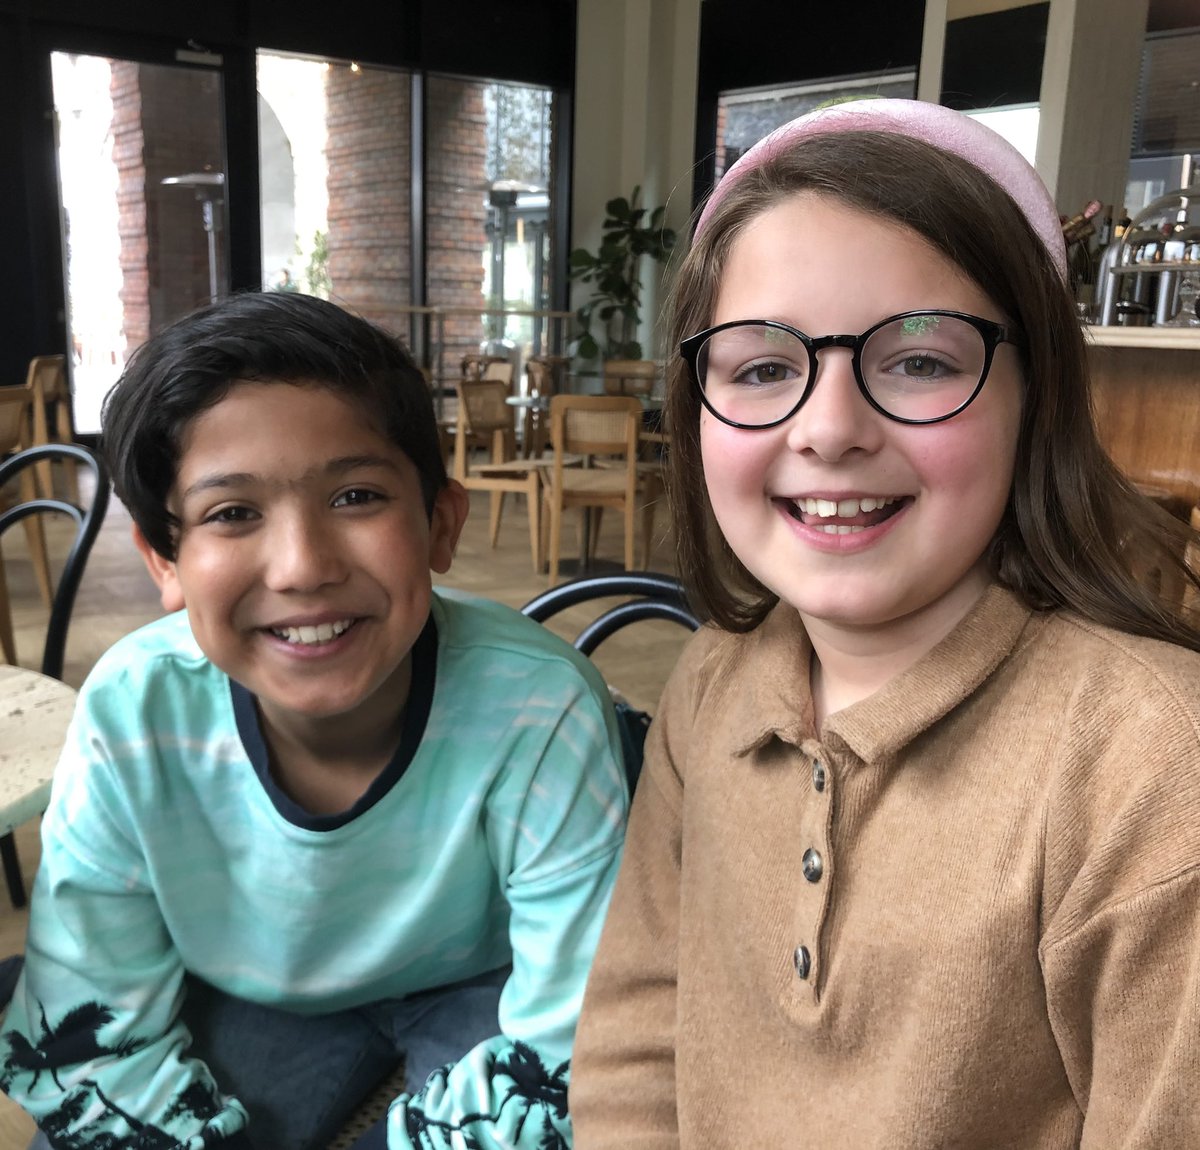 An absolute joy to catch up with Avi & Annie in between their recording sessions today #youngperformers #voiceover #animationseries @PDMLondon